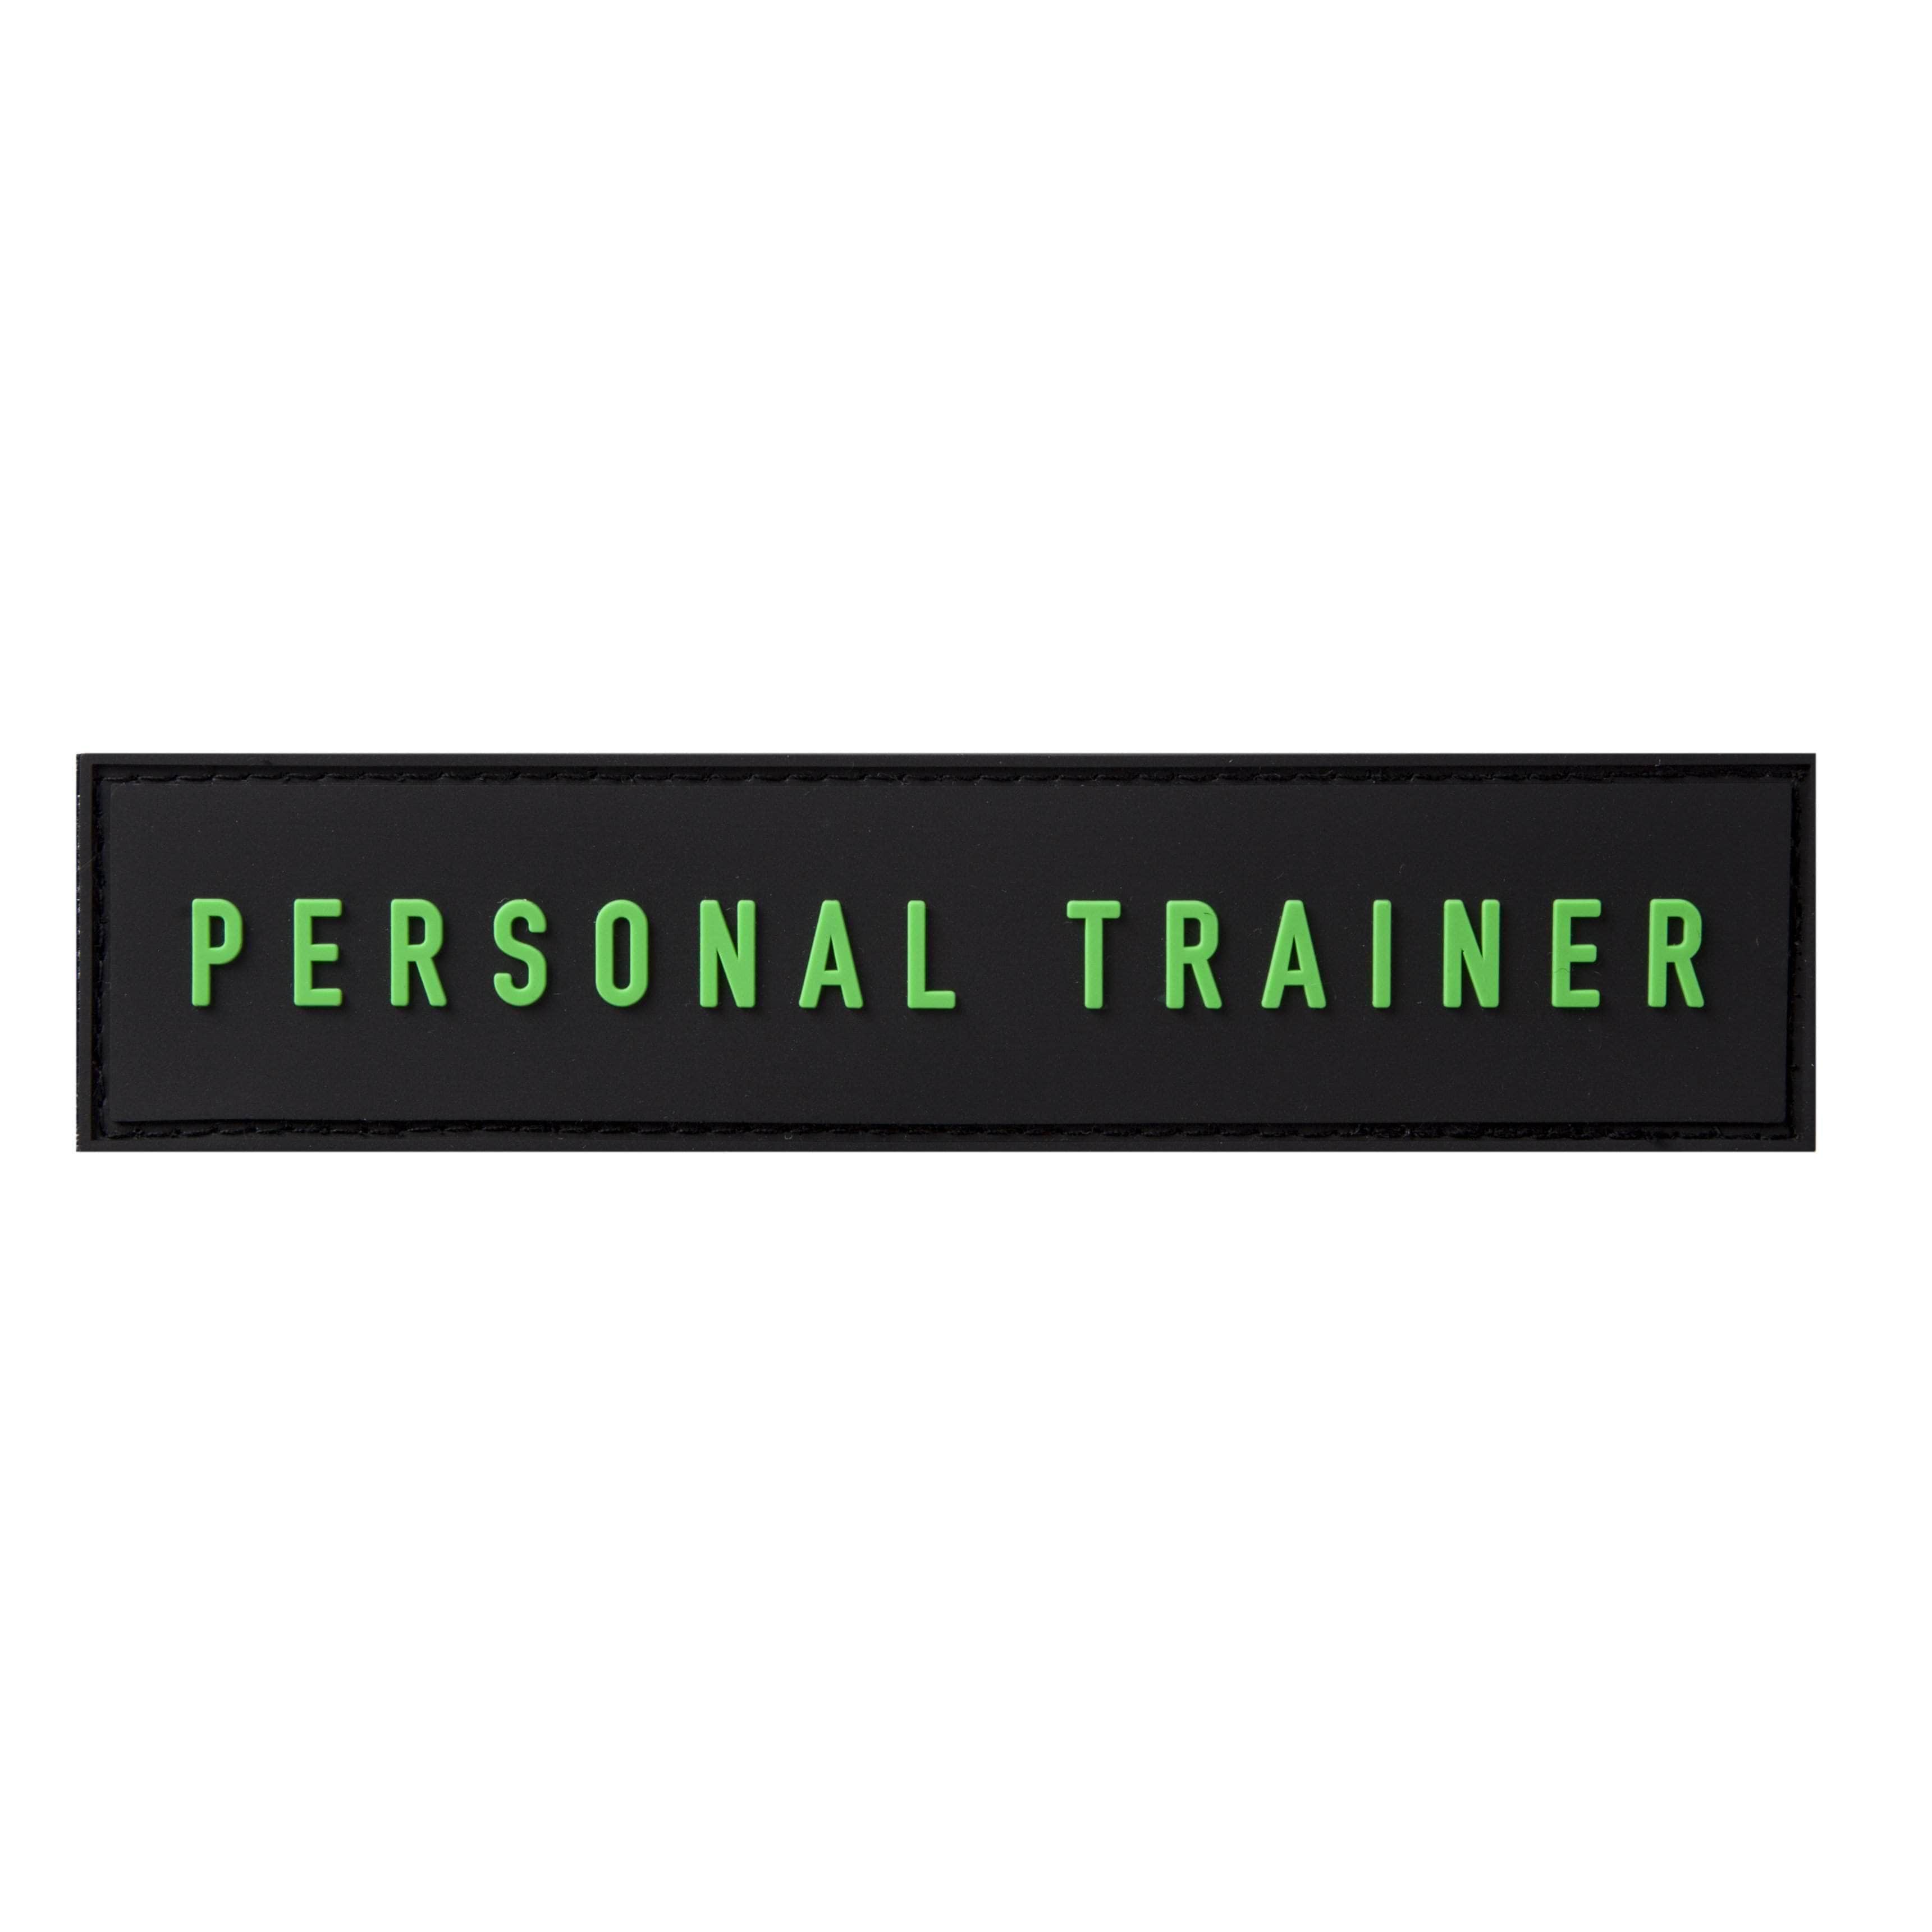 Built for Athletes Patches Personal Trainer Patch